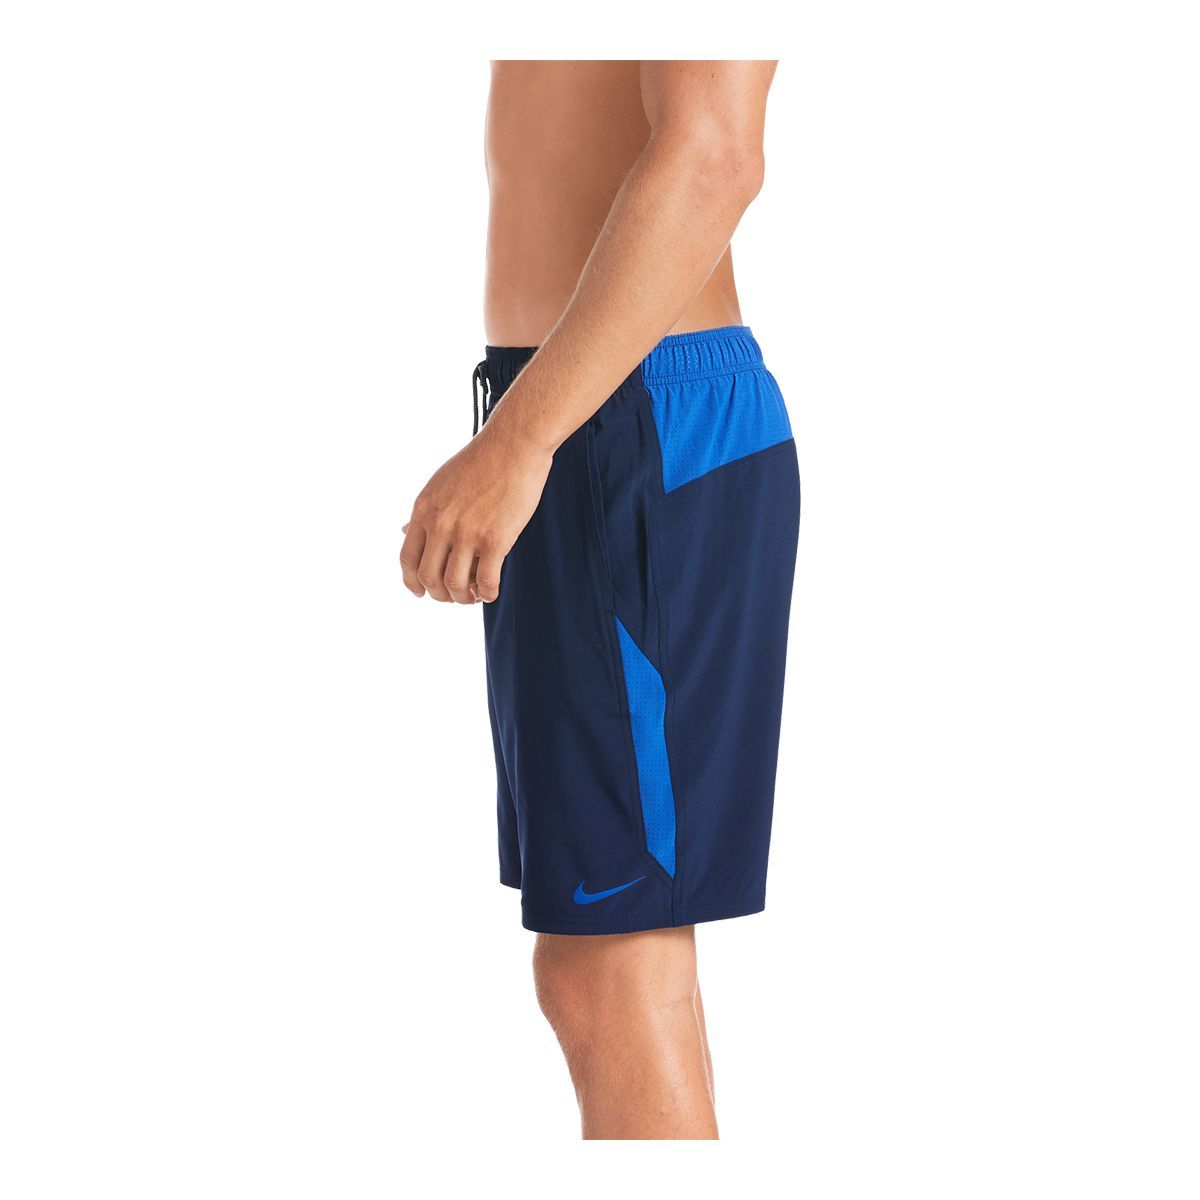 Nike Men's Core Contend Swim Volley Shorts, 9, Breathable